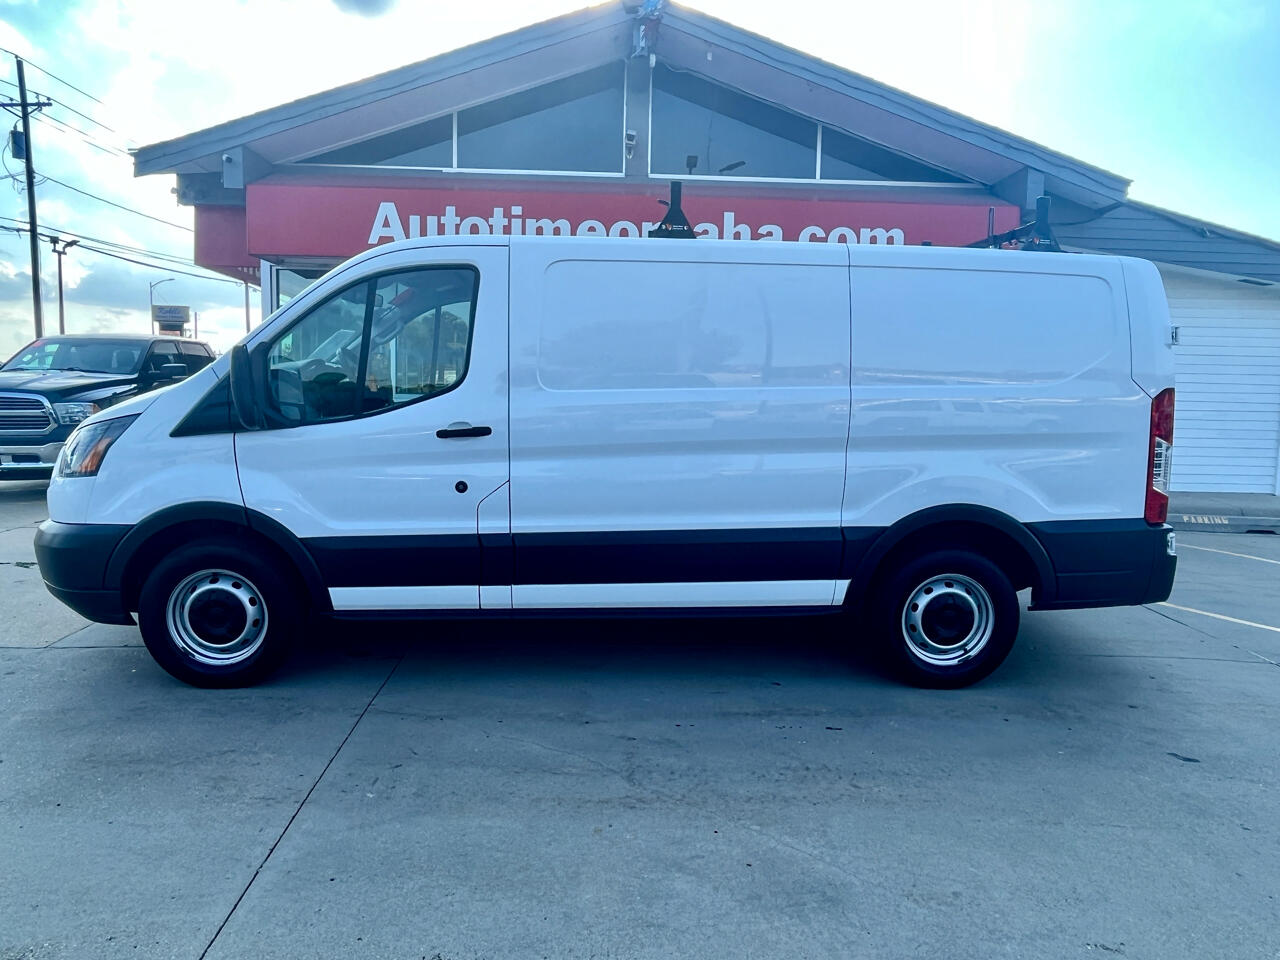 2018 Ford Transit 150 Van Low Roof w/Sliding Pass. 130-in. WB